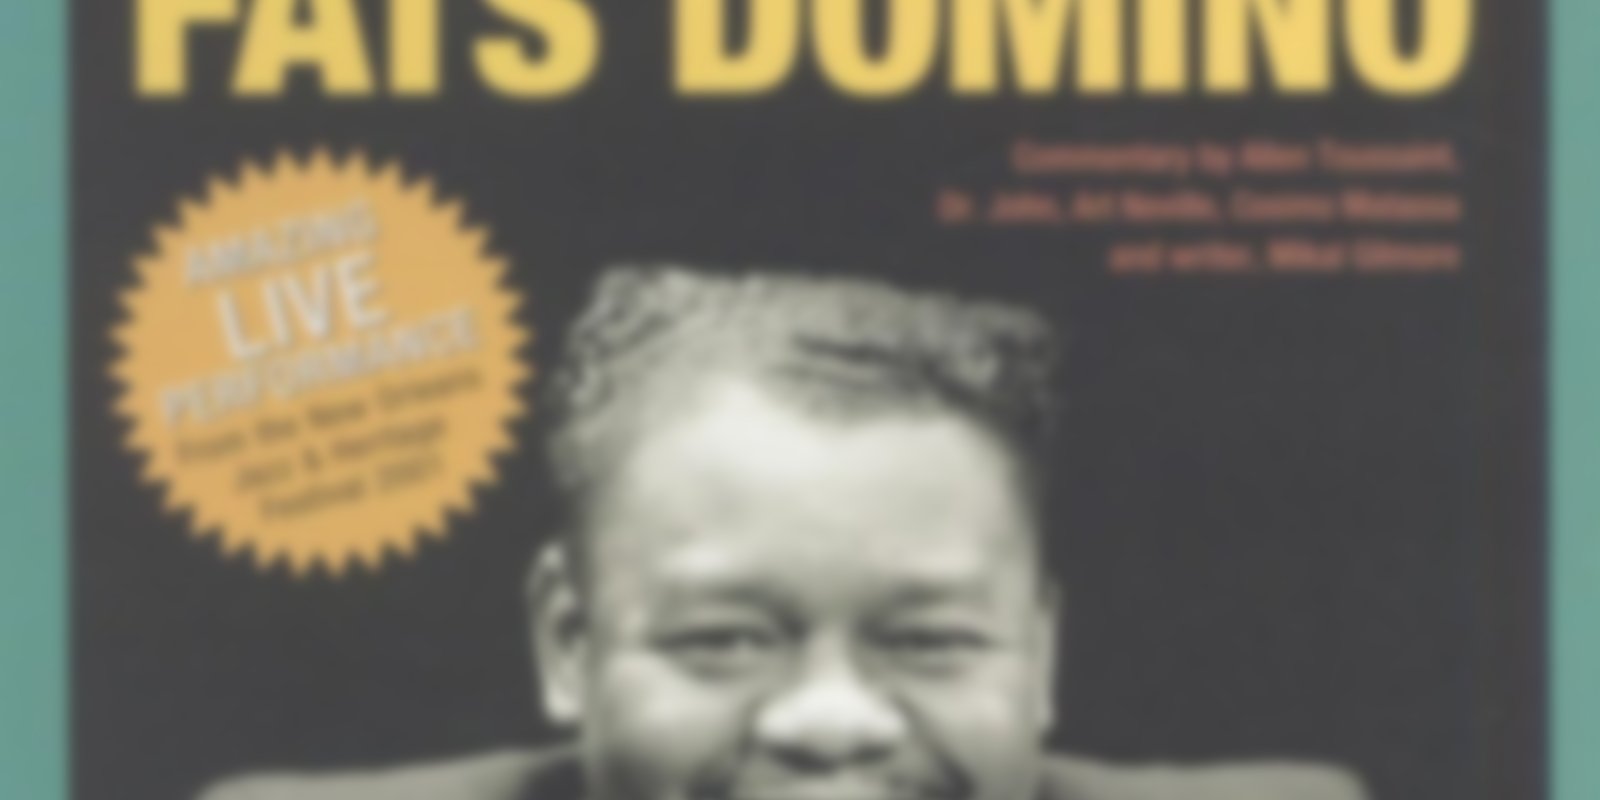 The Legends of New Orleans - The Music of Fats Domino